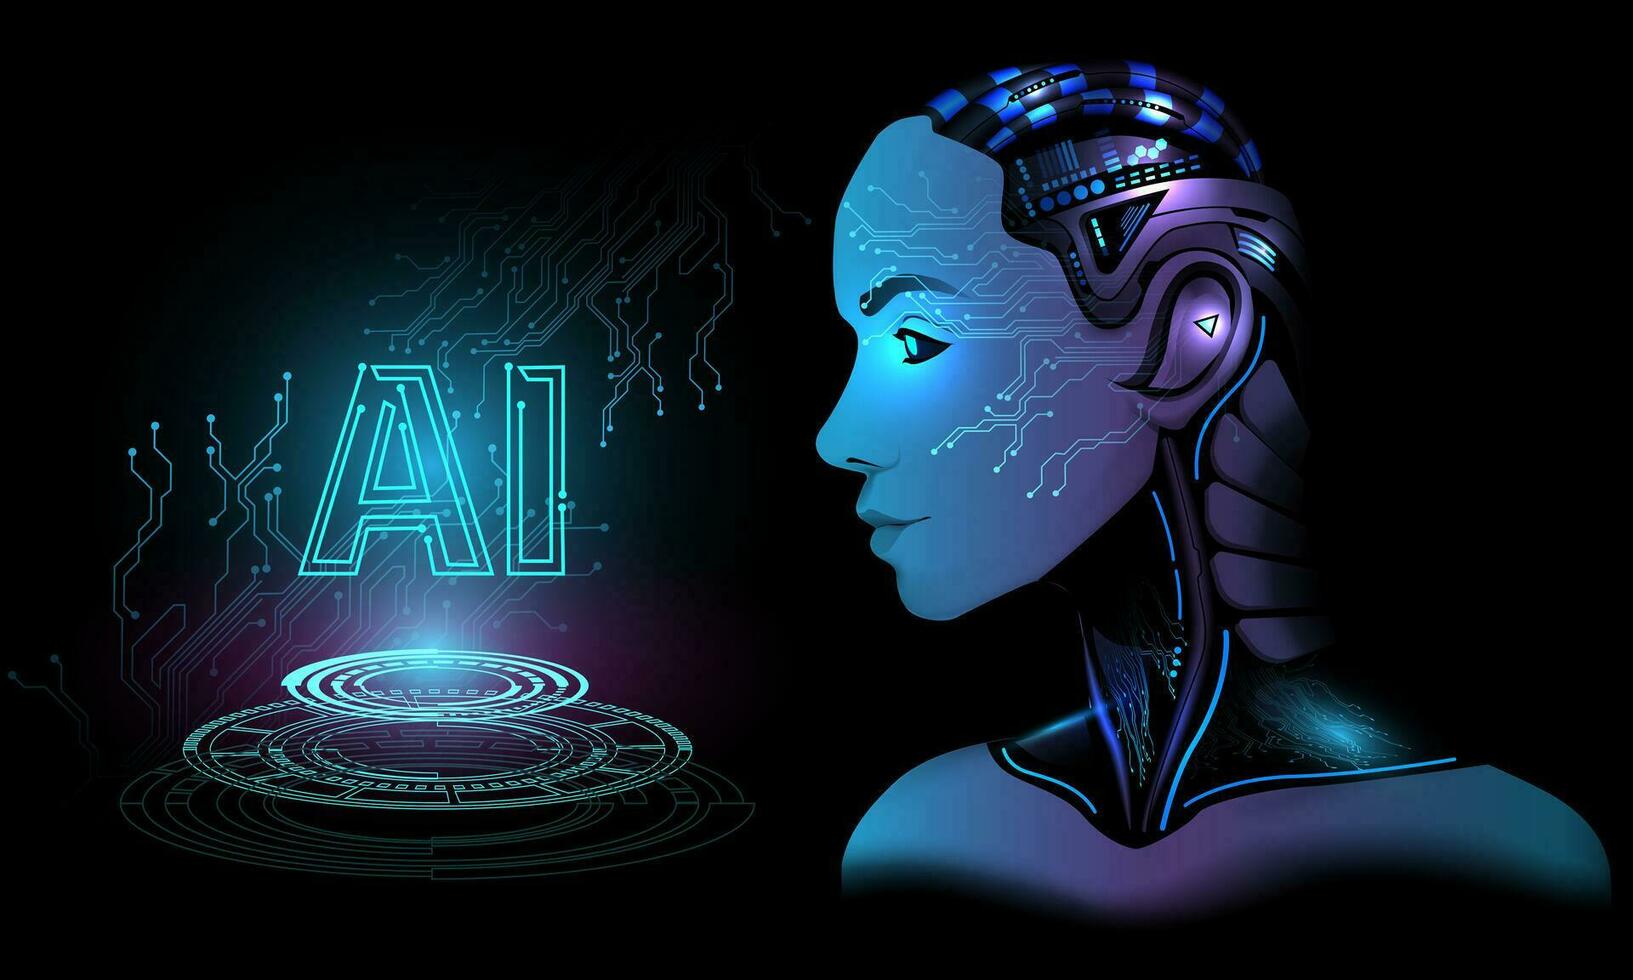 Robot man Artificial intelligence with a beautiful face look at logo AI on hand in blue circuit bokeh blur virtual cyberspace futuristic technology vector